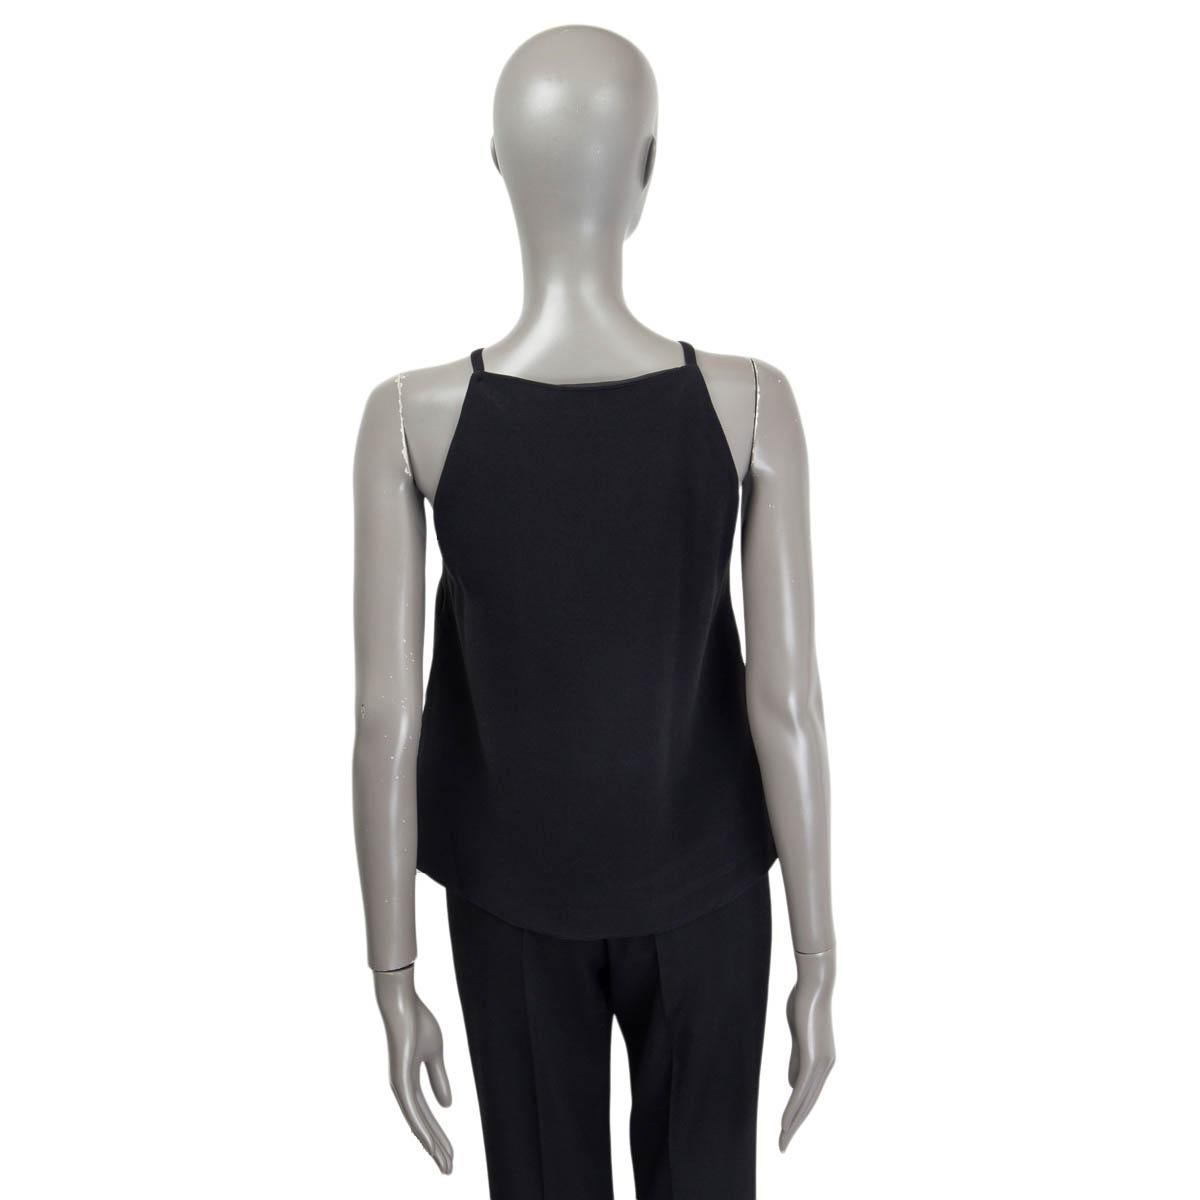 100% authentic Miu Miu sleeveless asymmetrical top in black acetate (53%) and viscose (47%). Opens with one push button at the back. Semi-lined in black nylon (100%). Has been worn and is in excellent condition.

Measurements
Tag